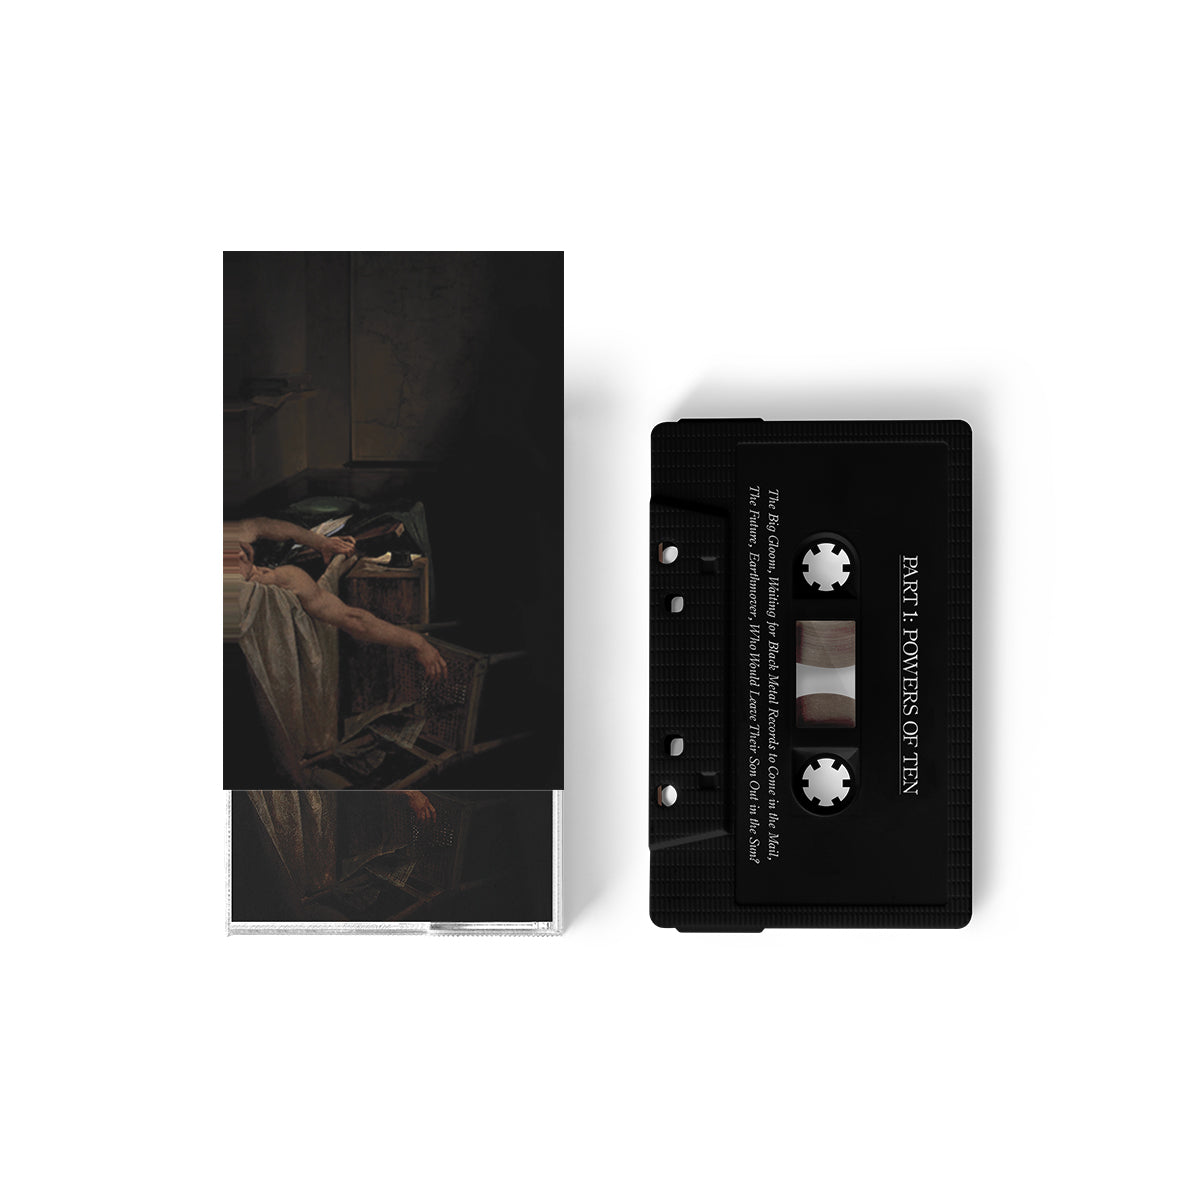 HAVE A NICE LIFE "Voids" Tape